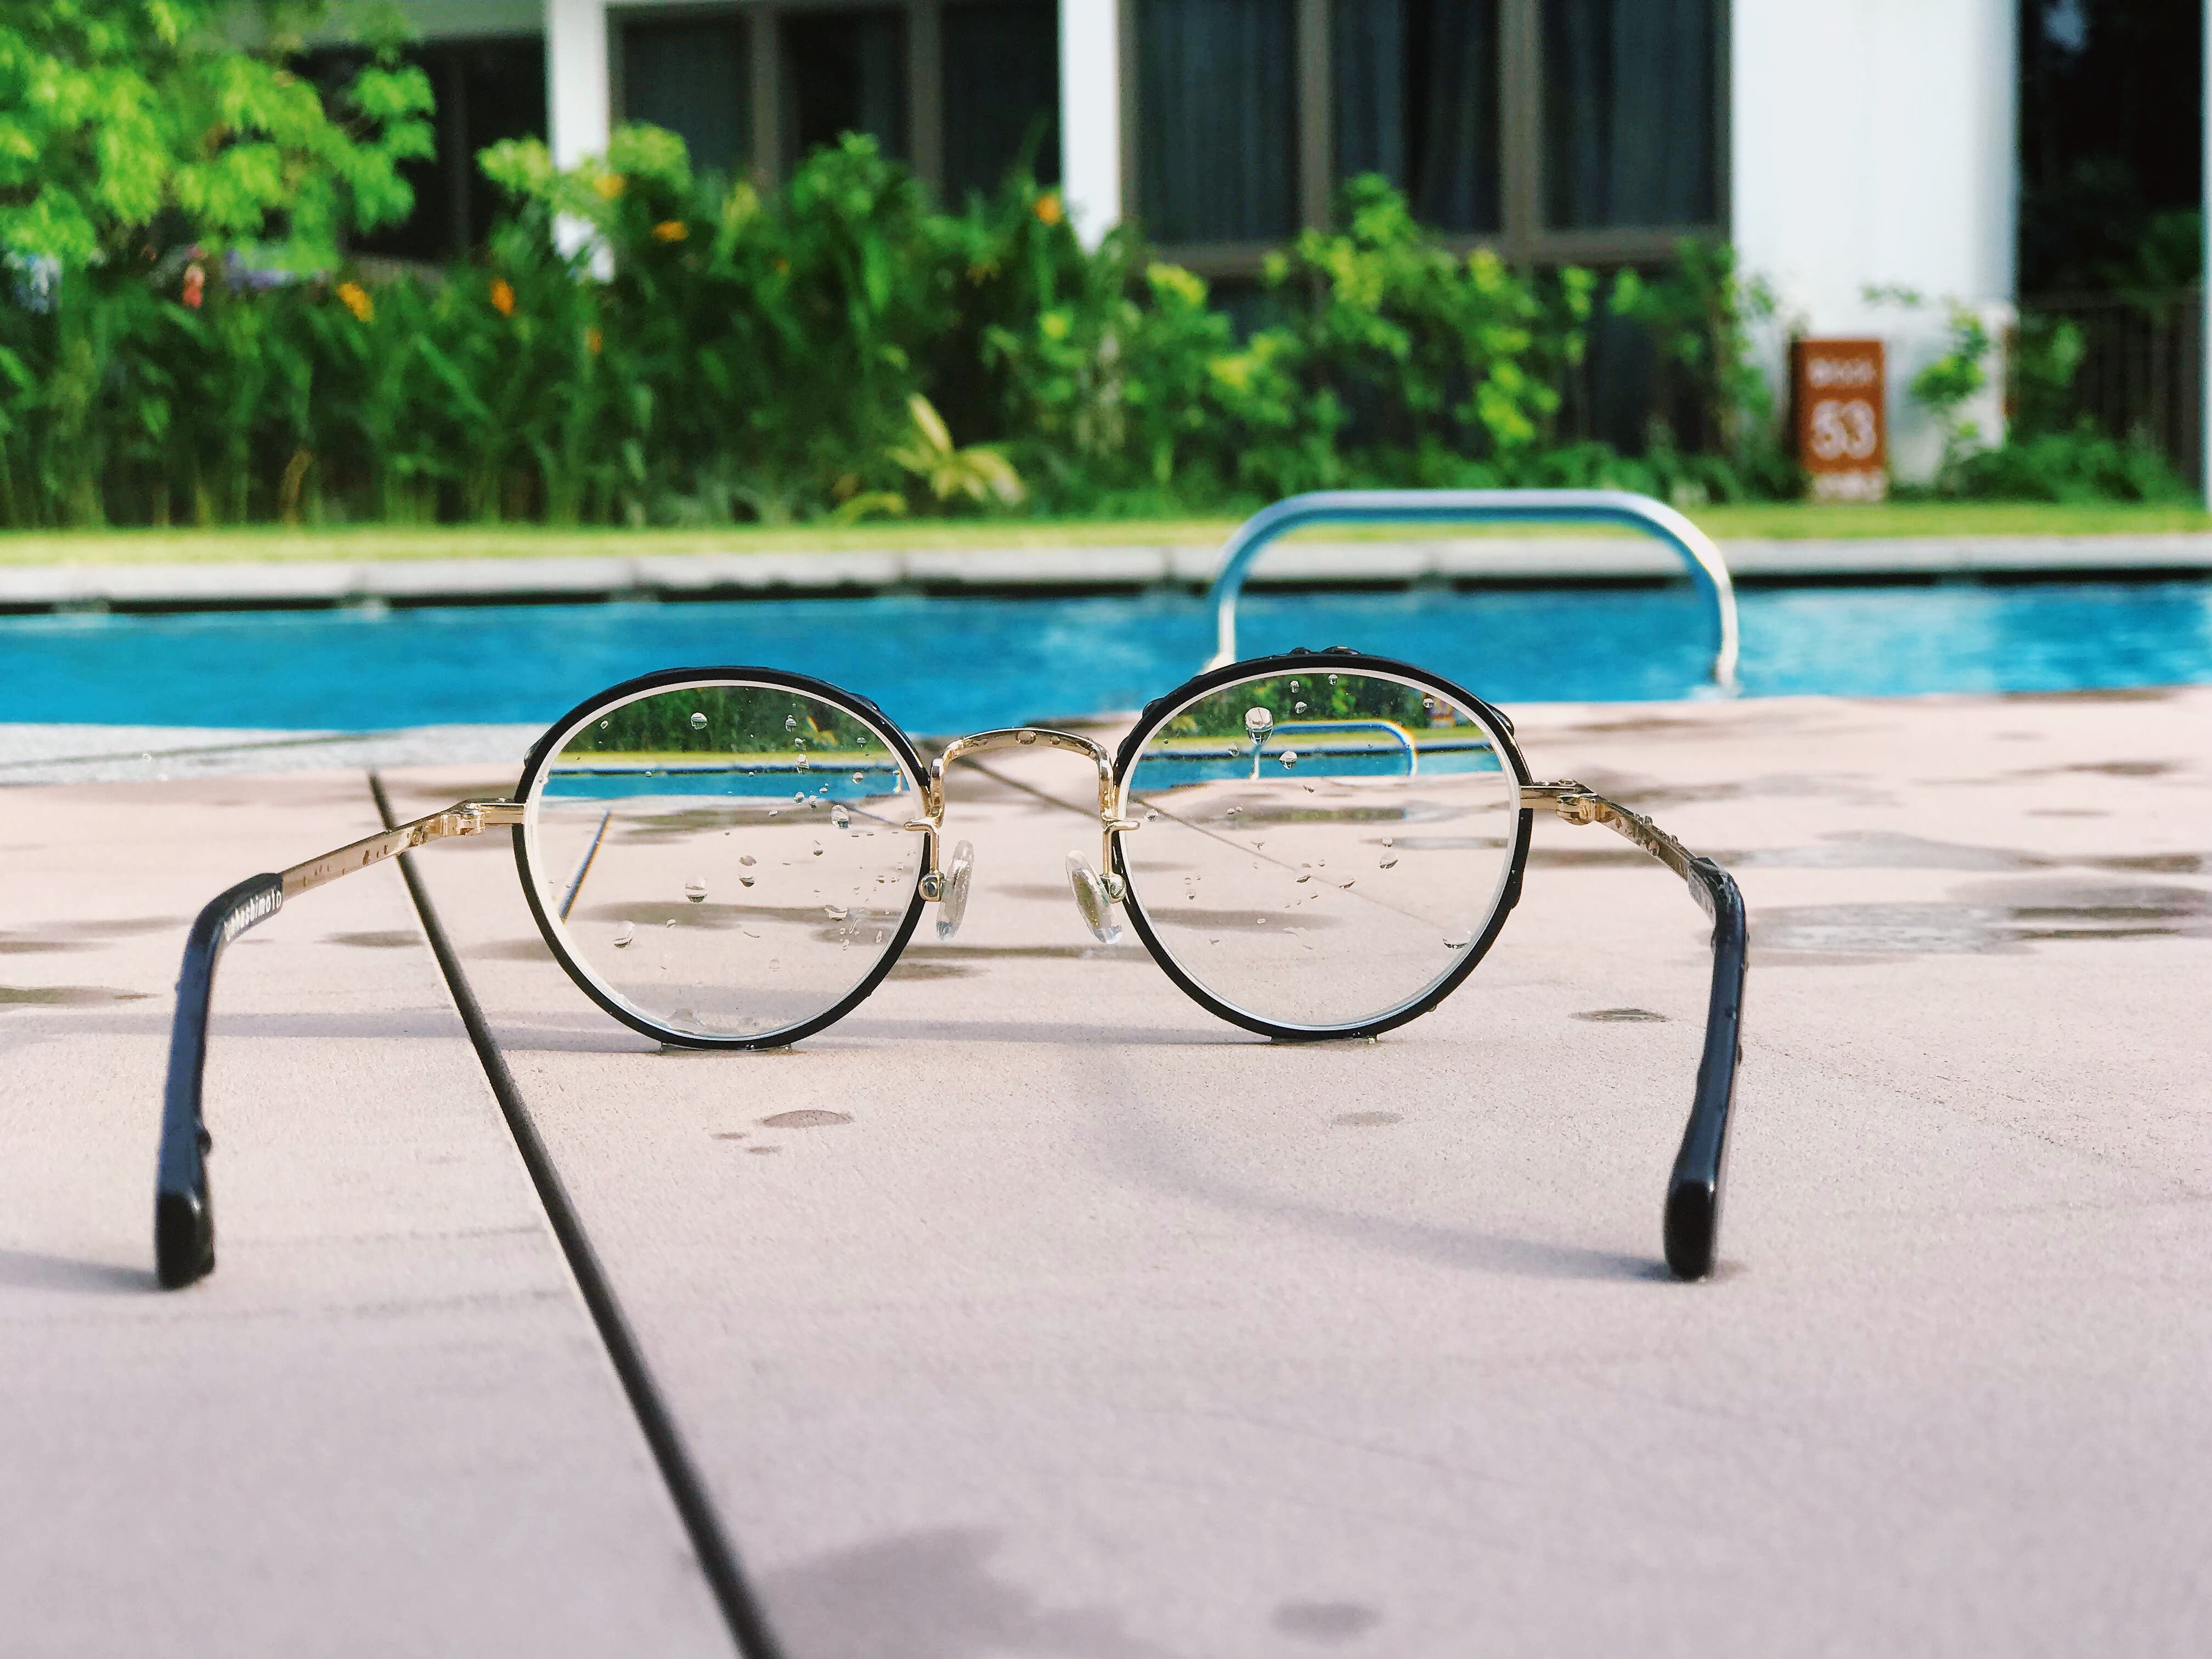 Reading glasses next to a pool